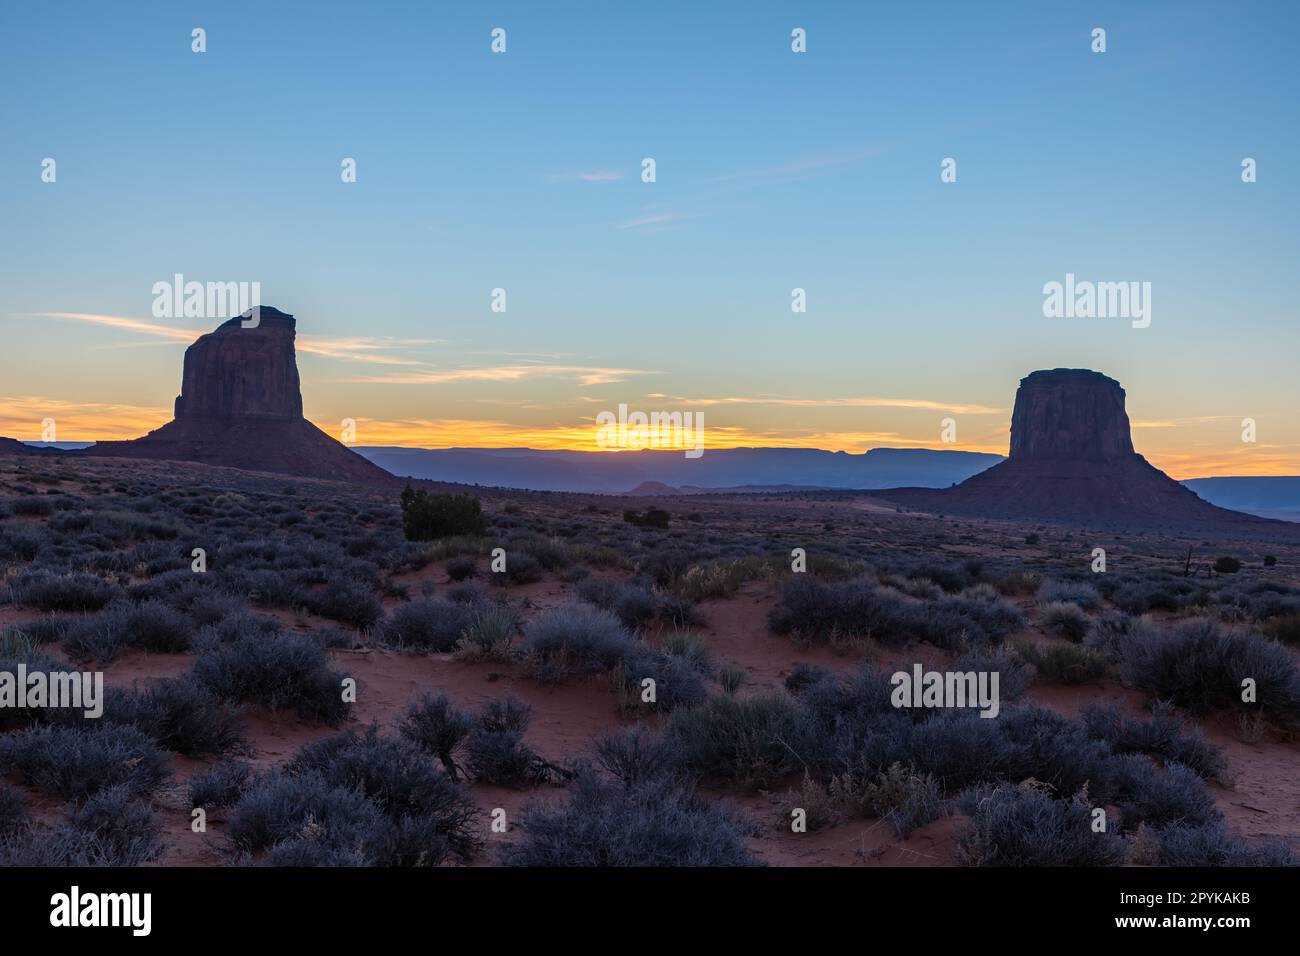 Monument Valley Landscape at Sunset - Gray Whiskers Butte and Mitchell Butte Stock Photo